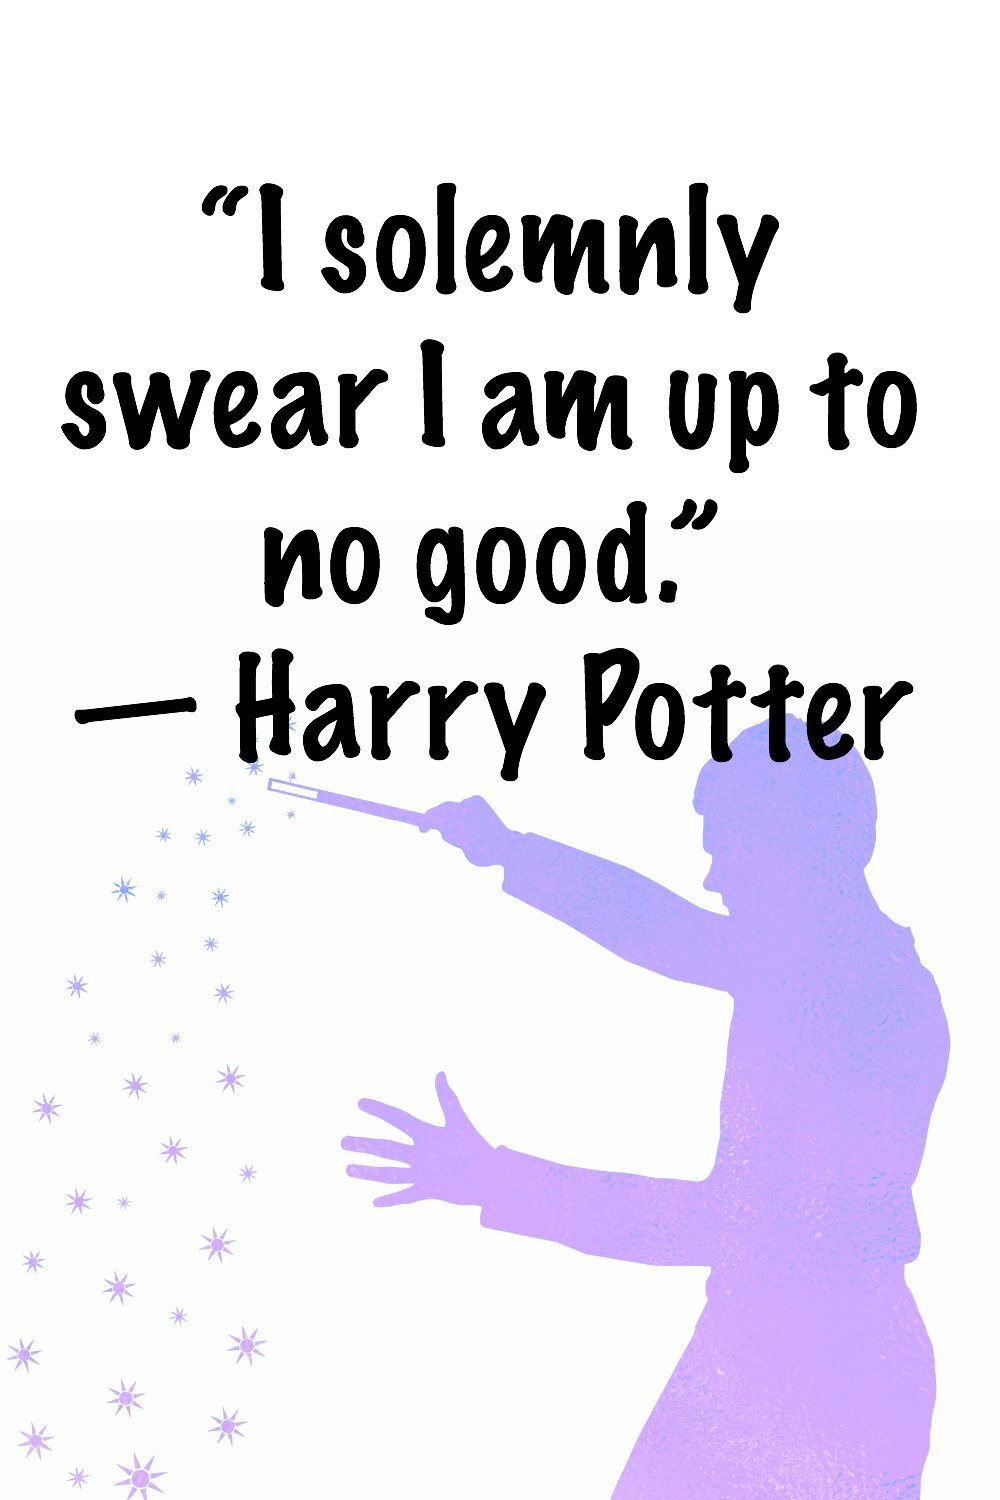 Short Harry Potter quotes